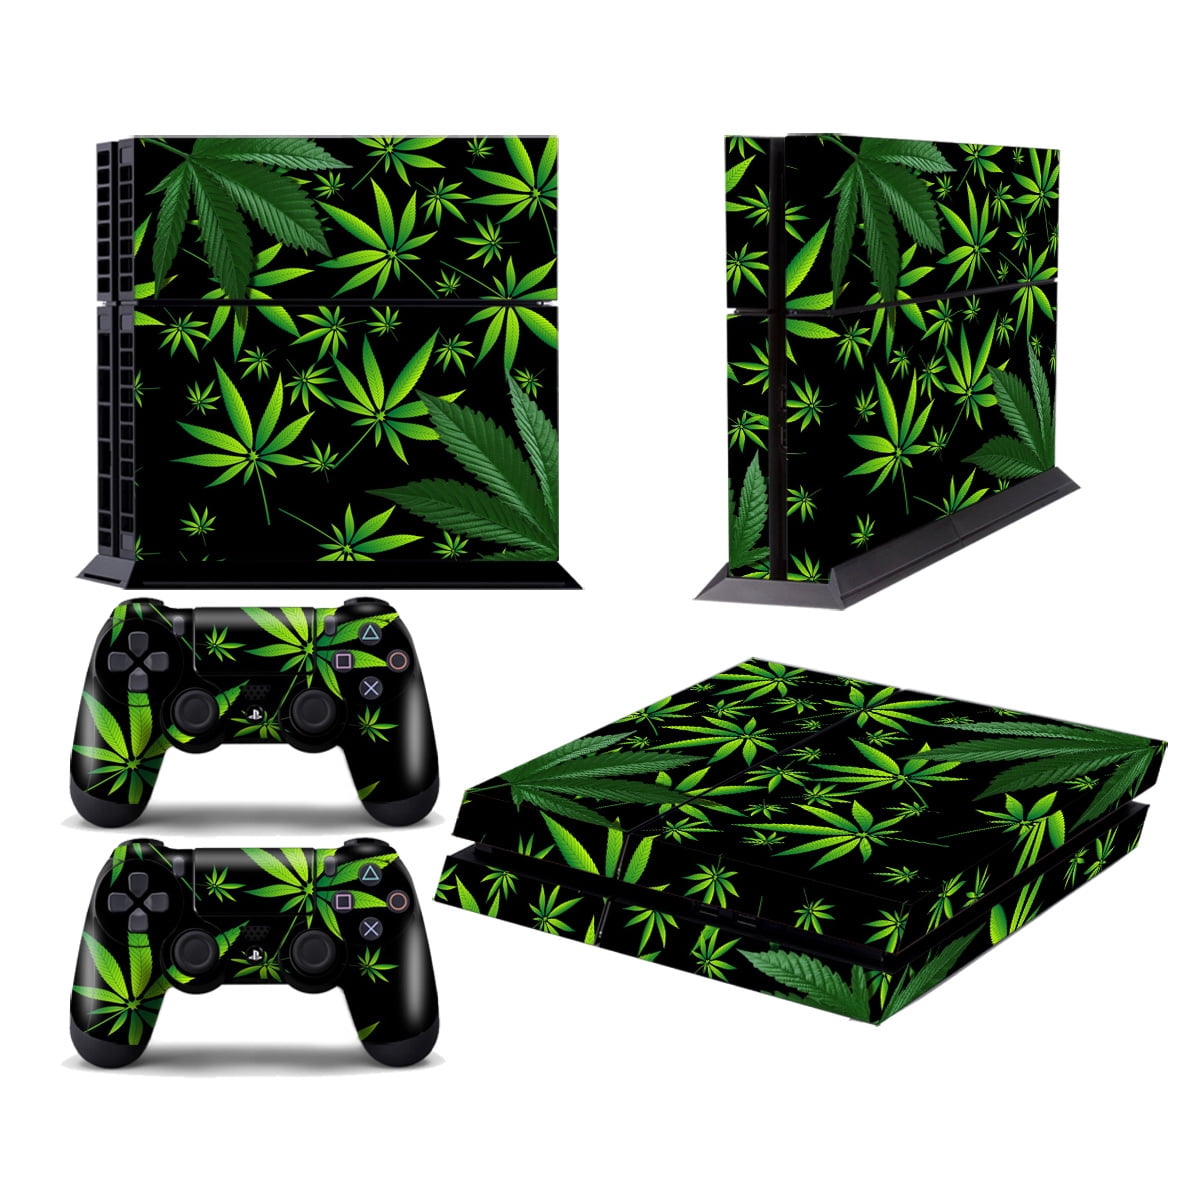 Vinyl Sticker Decals vinilo Calcomanía for Playstation 4 PRO Console & 2  Remote Game Pad Skins Cover - Compatible with PS4 PRO NIKELOG